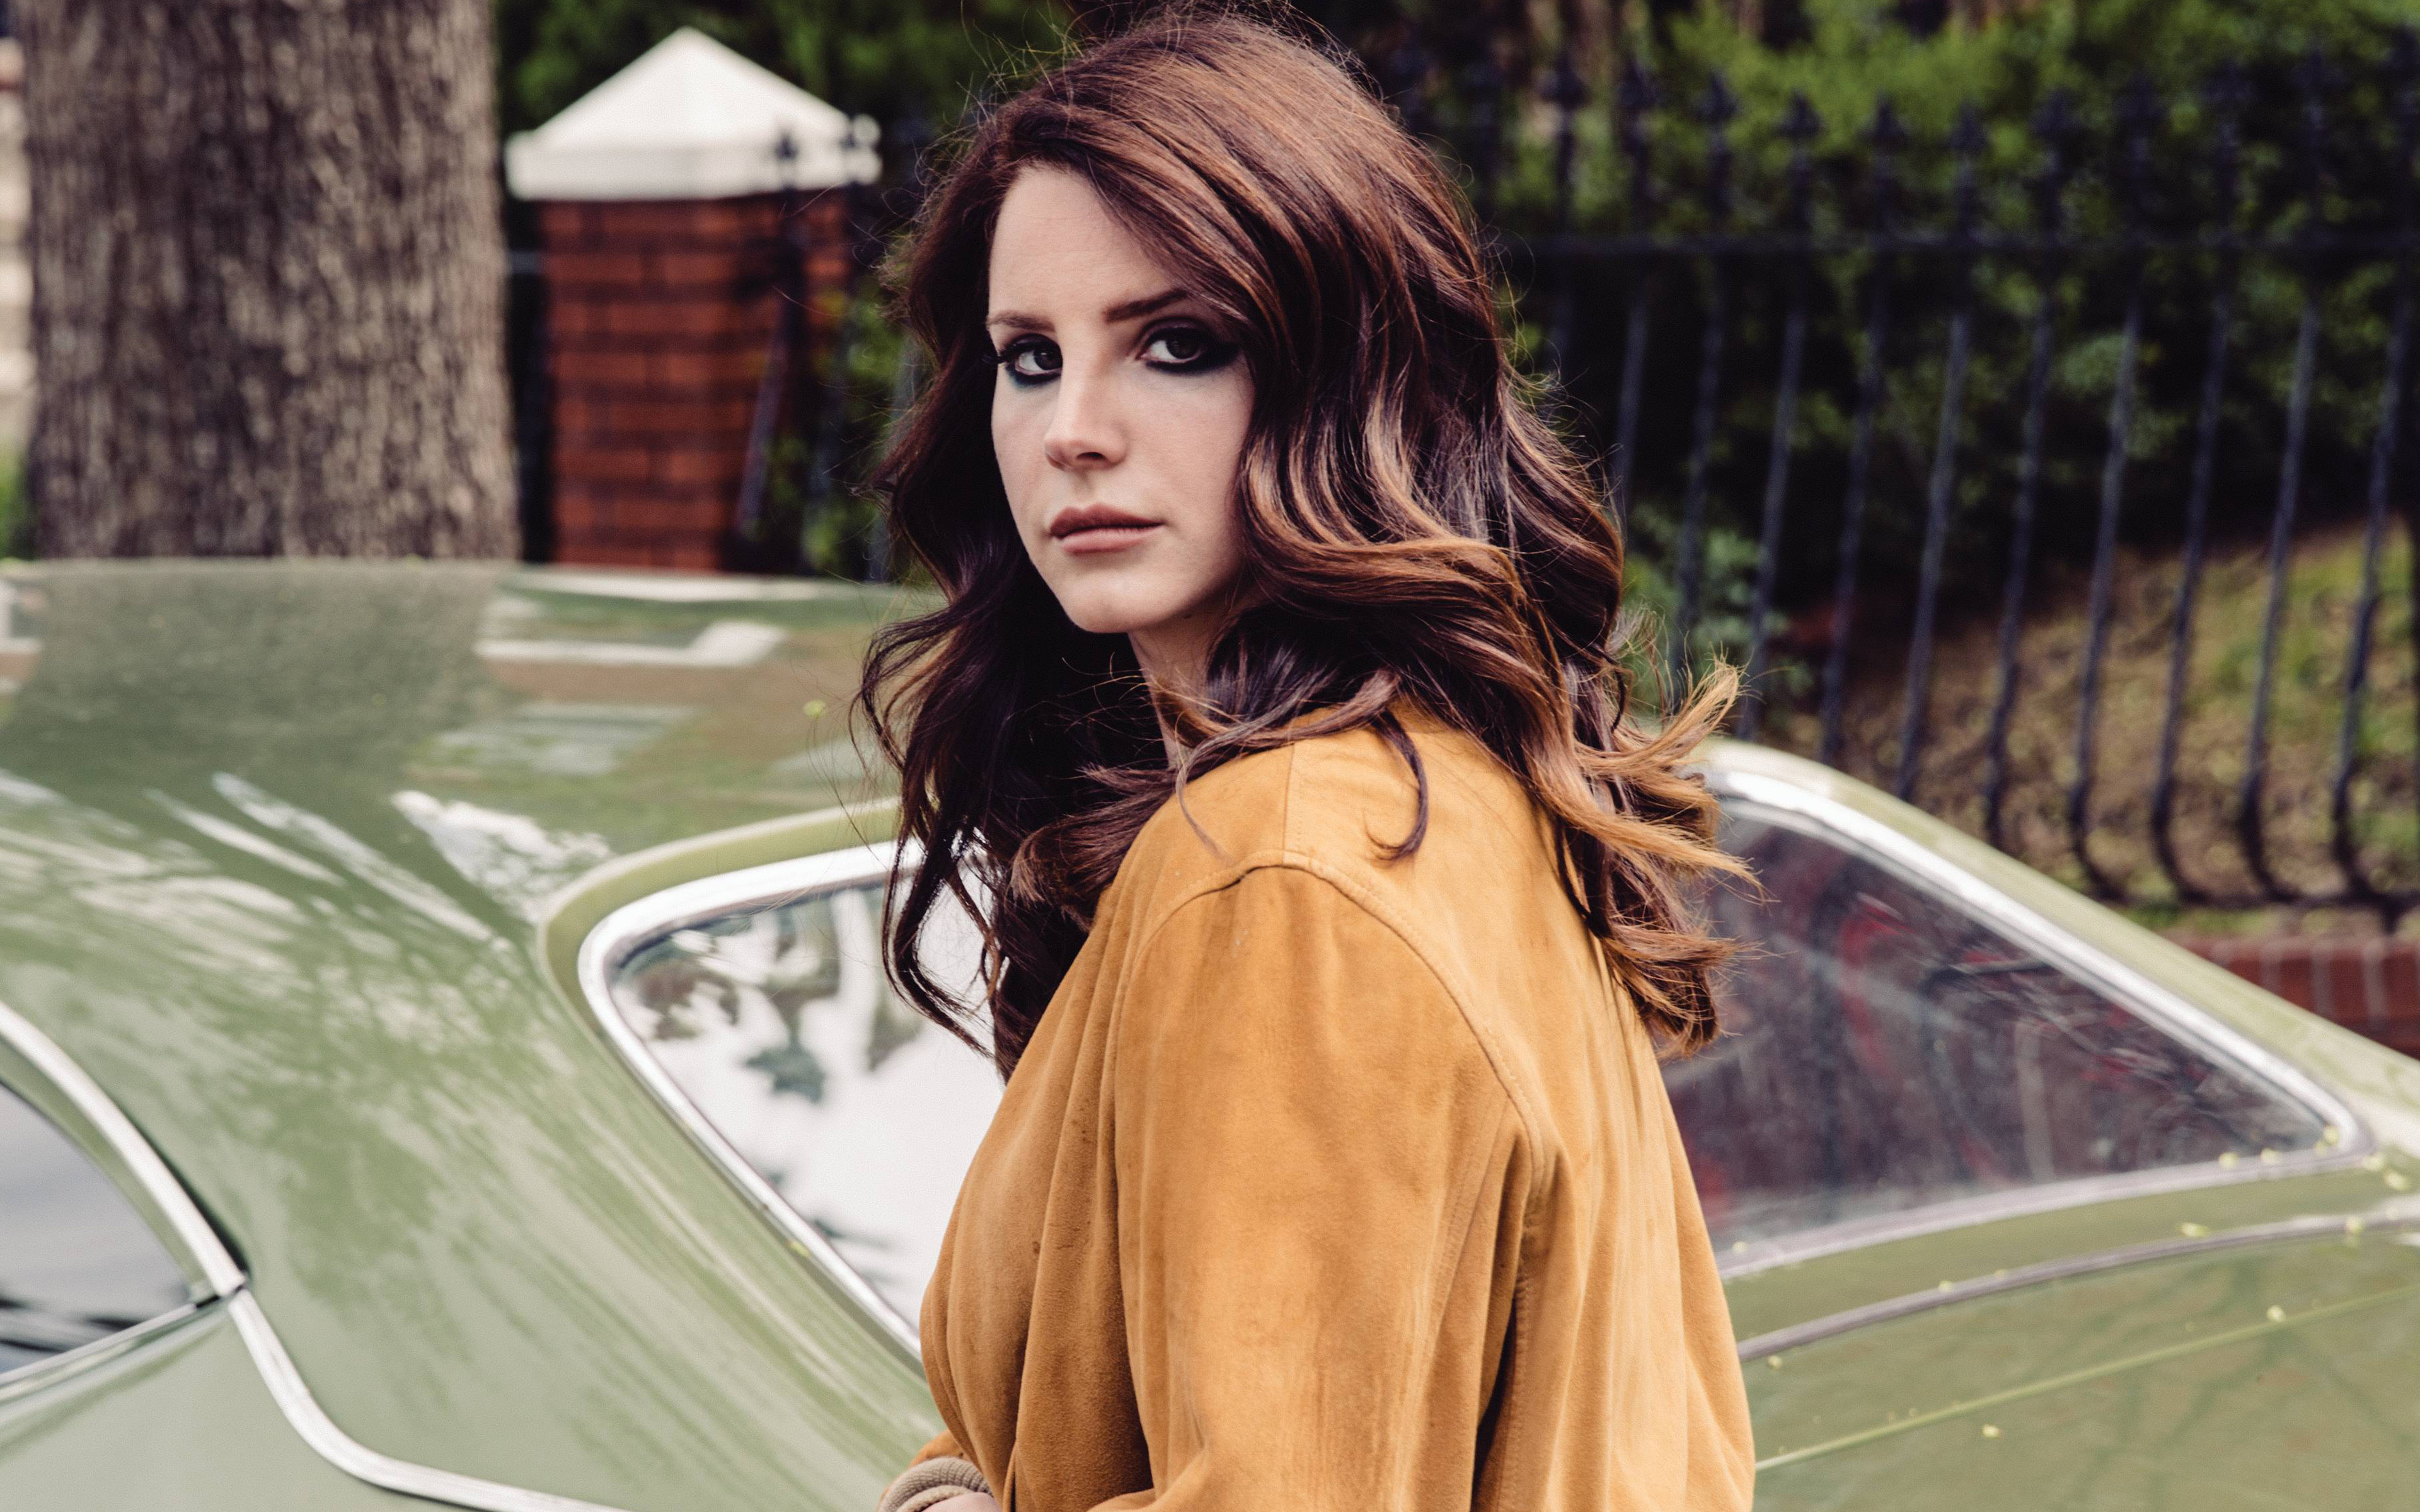 Download wallpaper Lana Del Rey, 4k, american singer, portrait, retro, beautiful woman for desktop with resolution 3840x2400. High Quality HD picture wallpaper